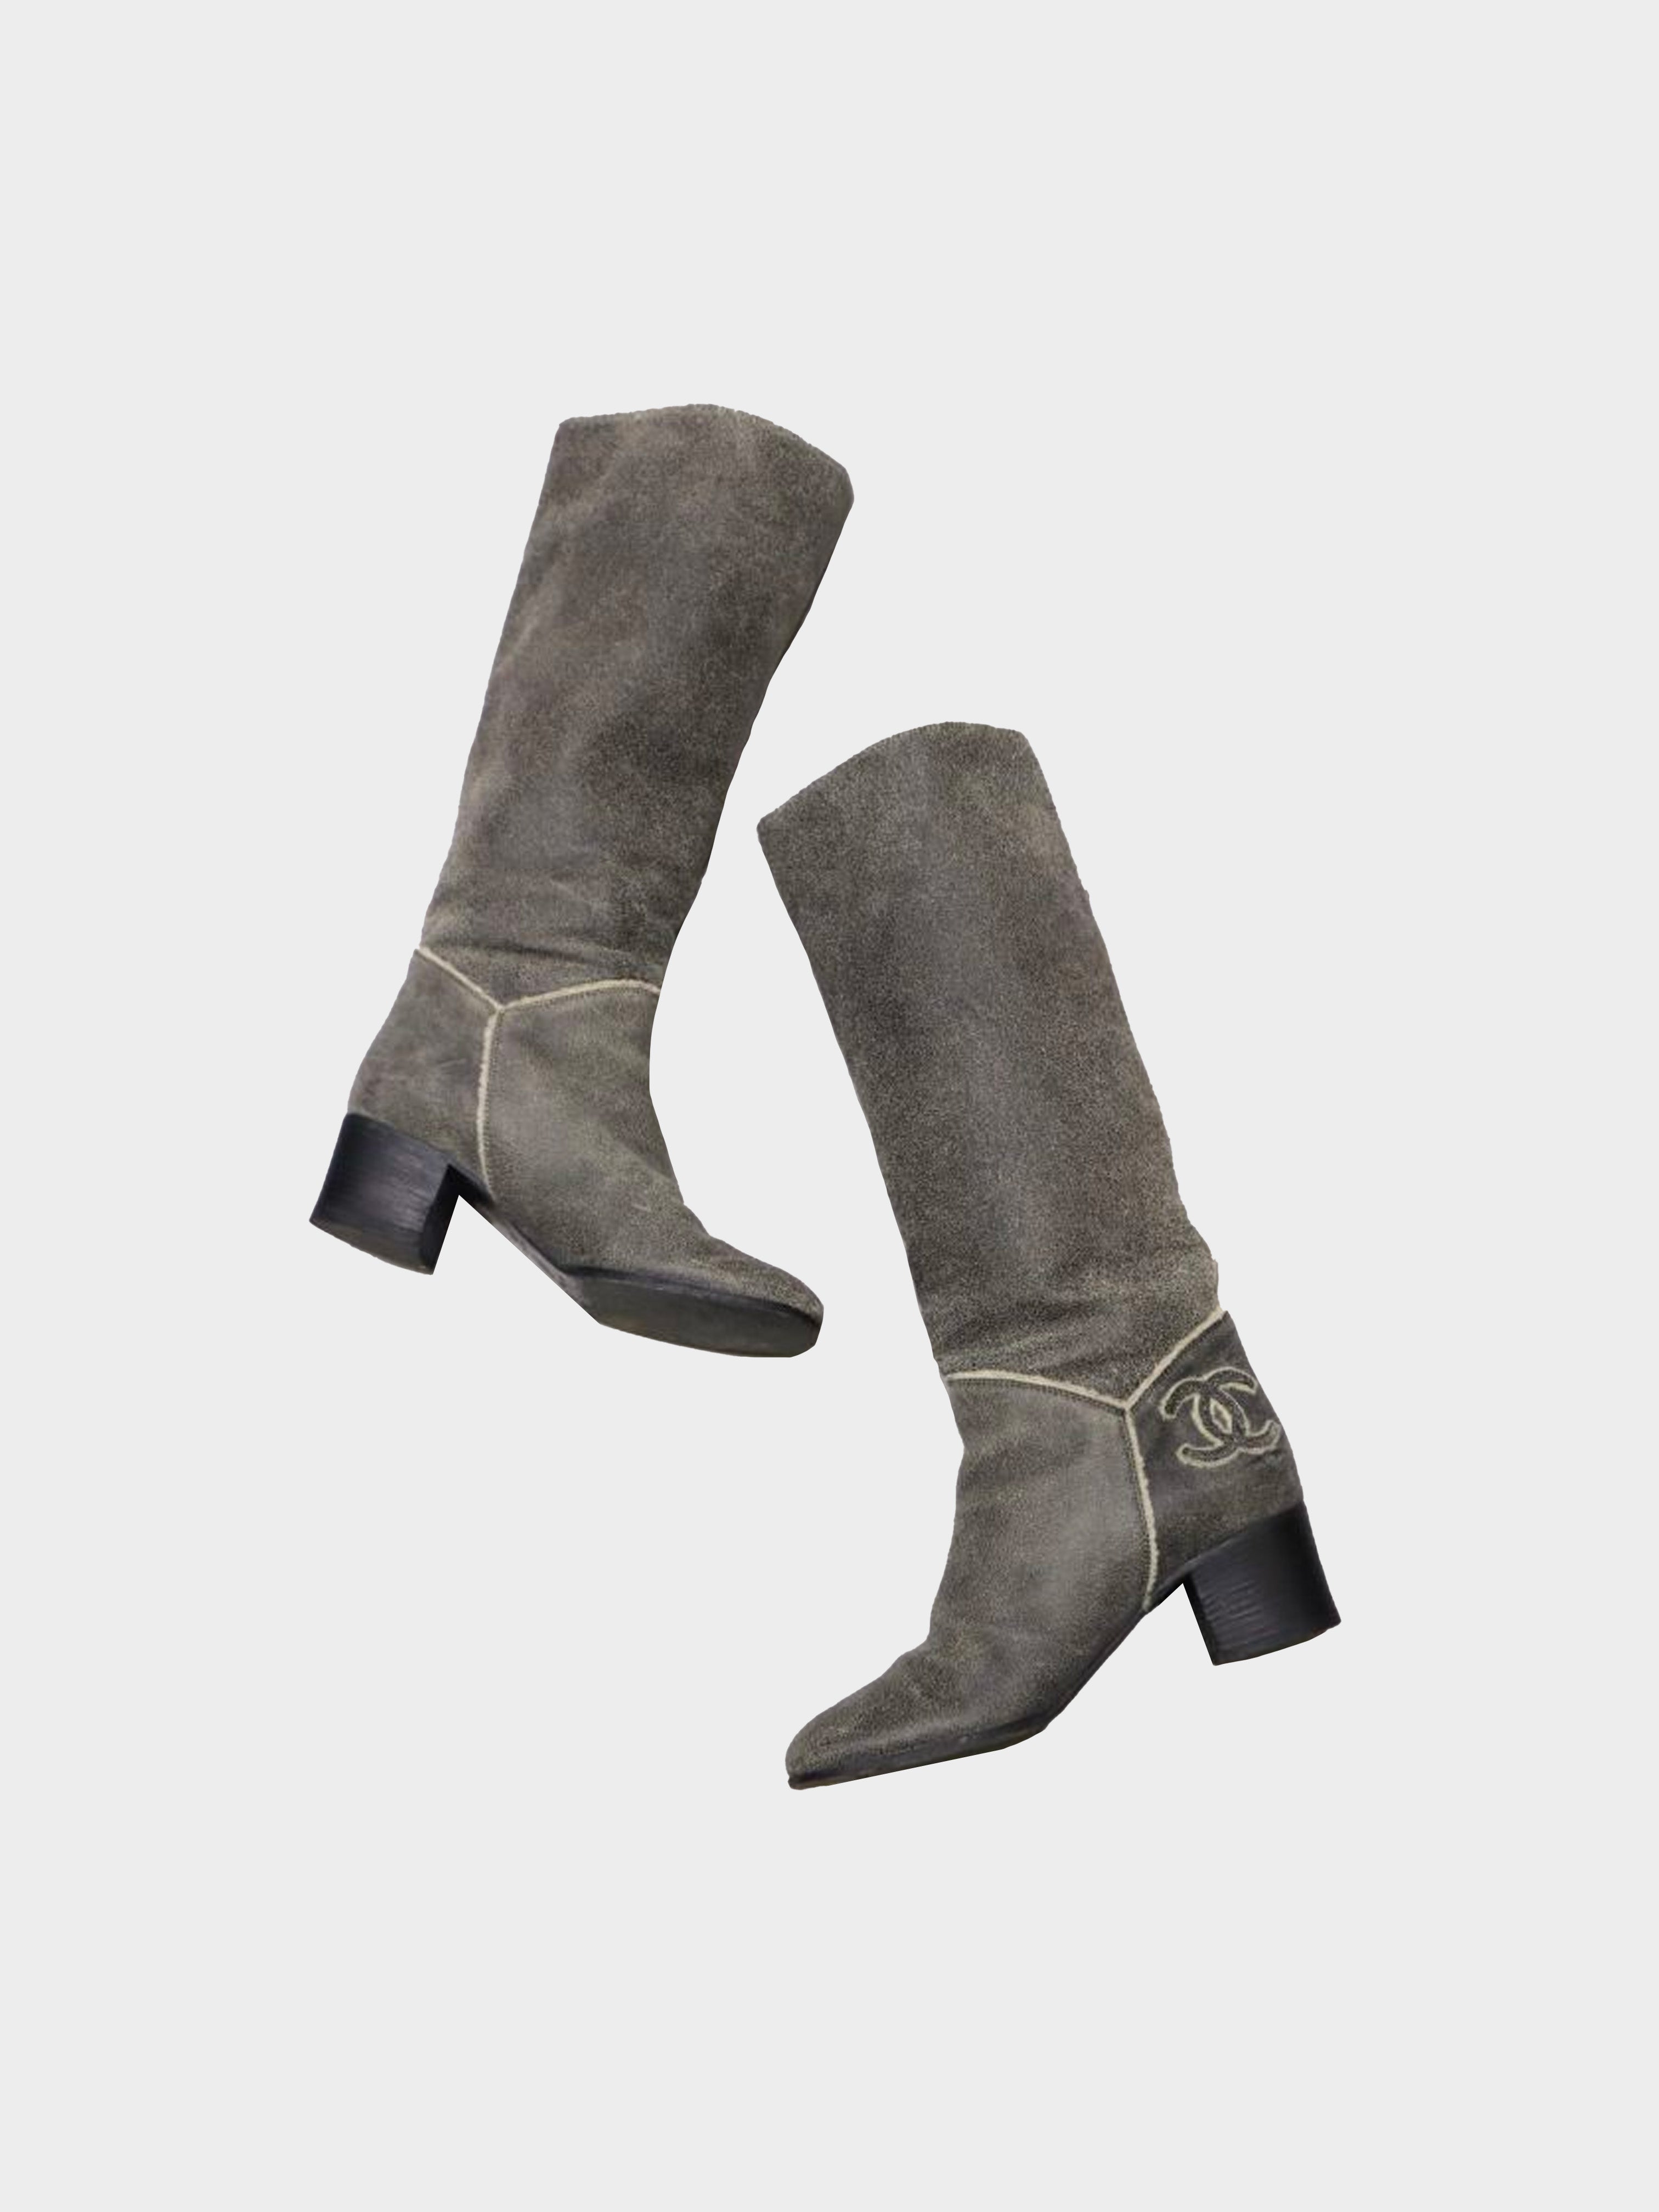 Chanel 2010s Shearling Logo Knee High Boots